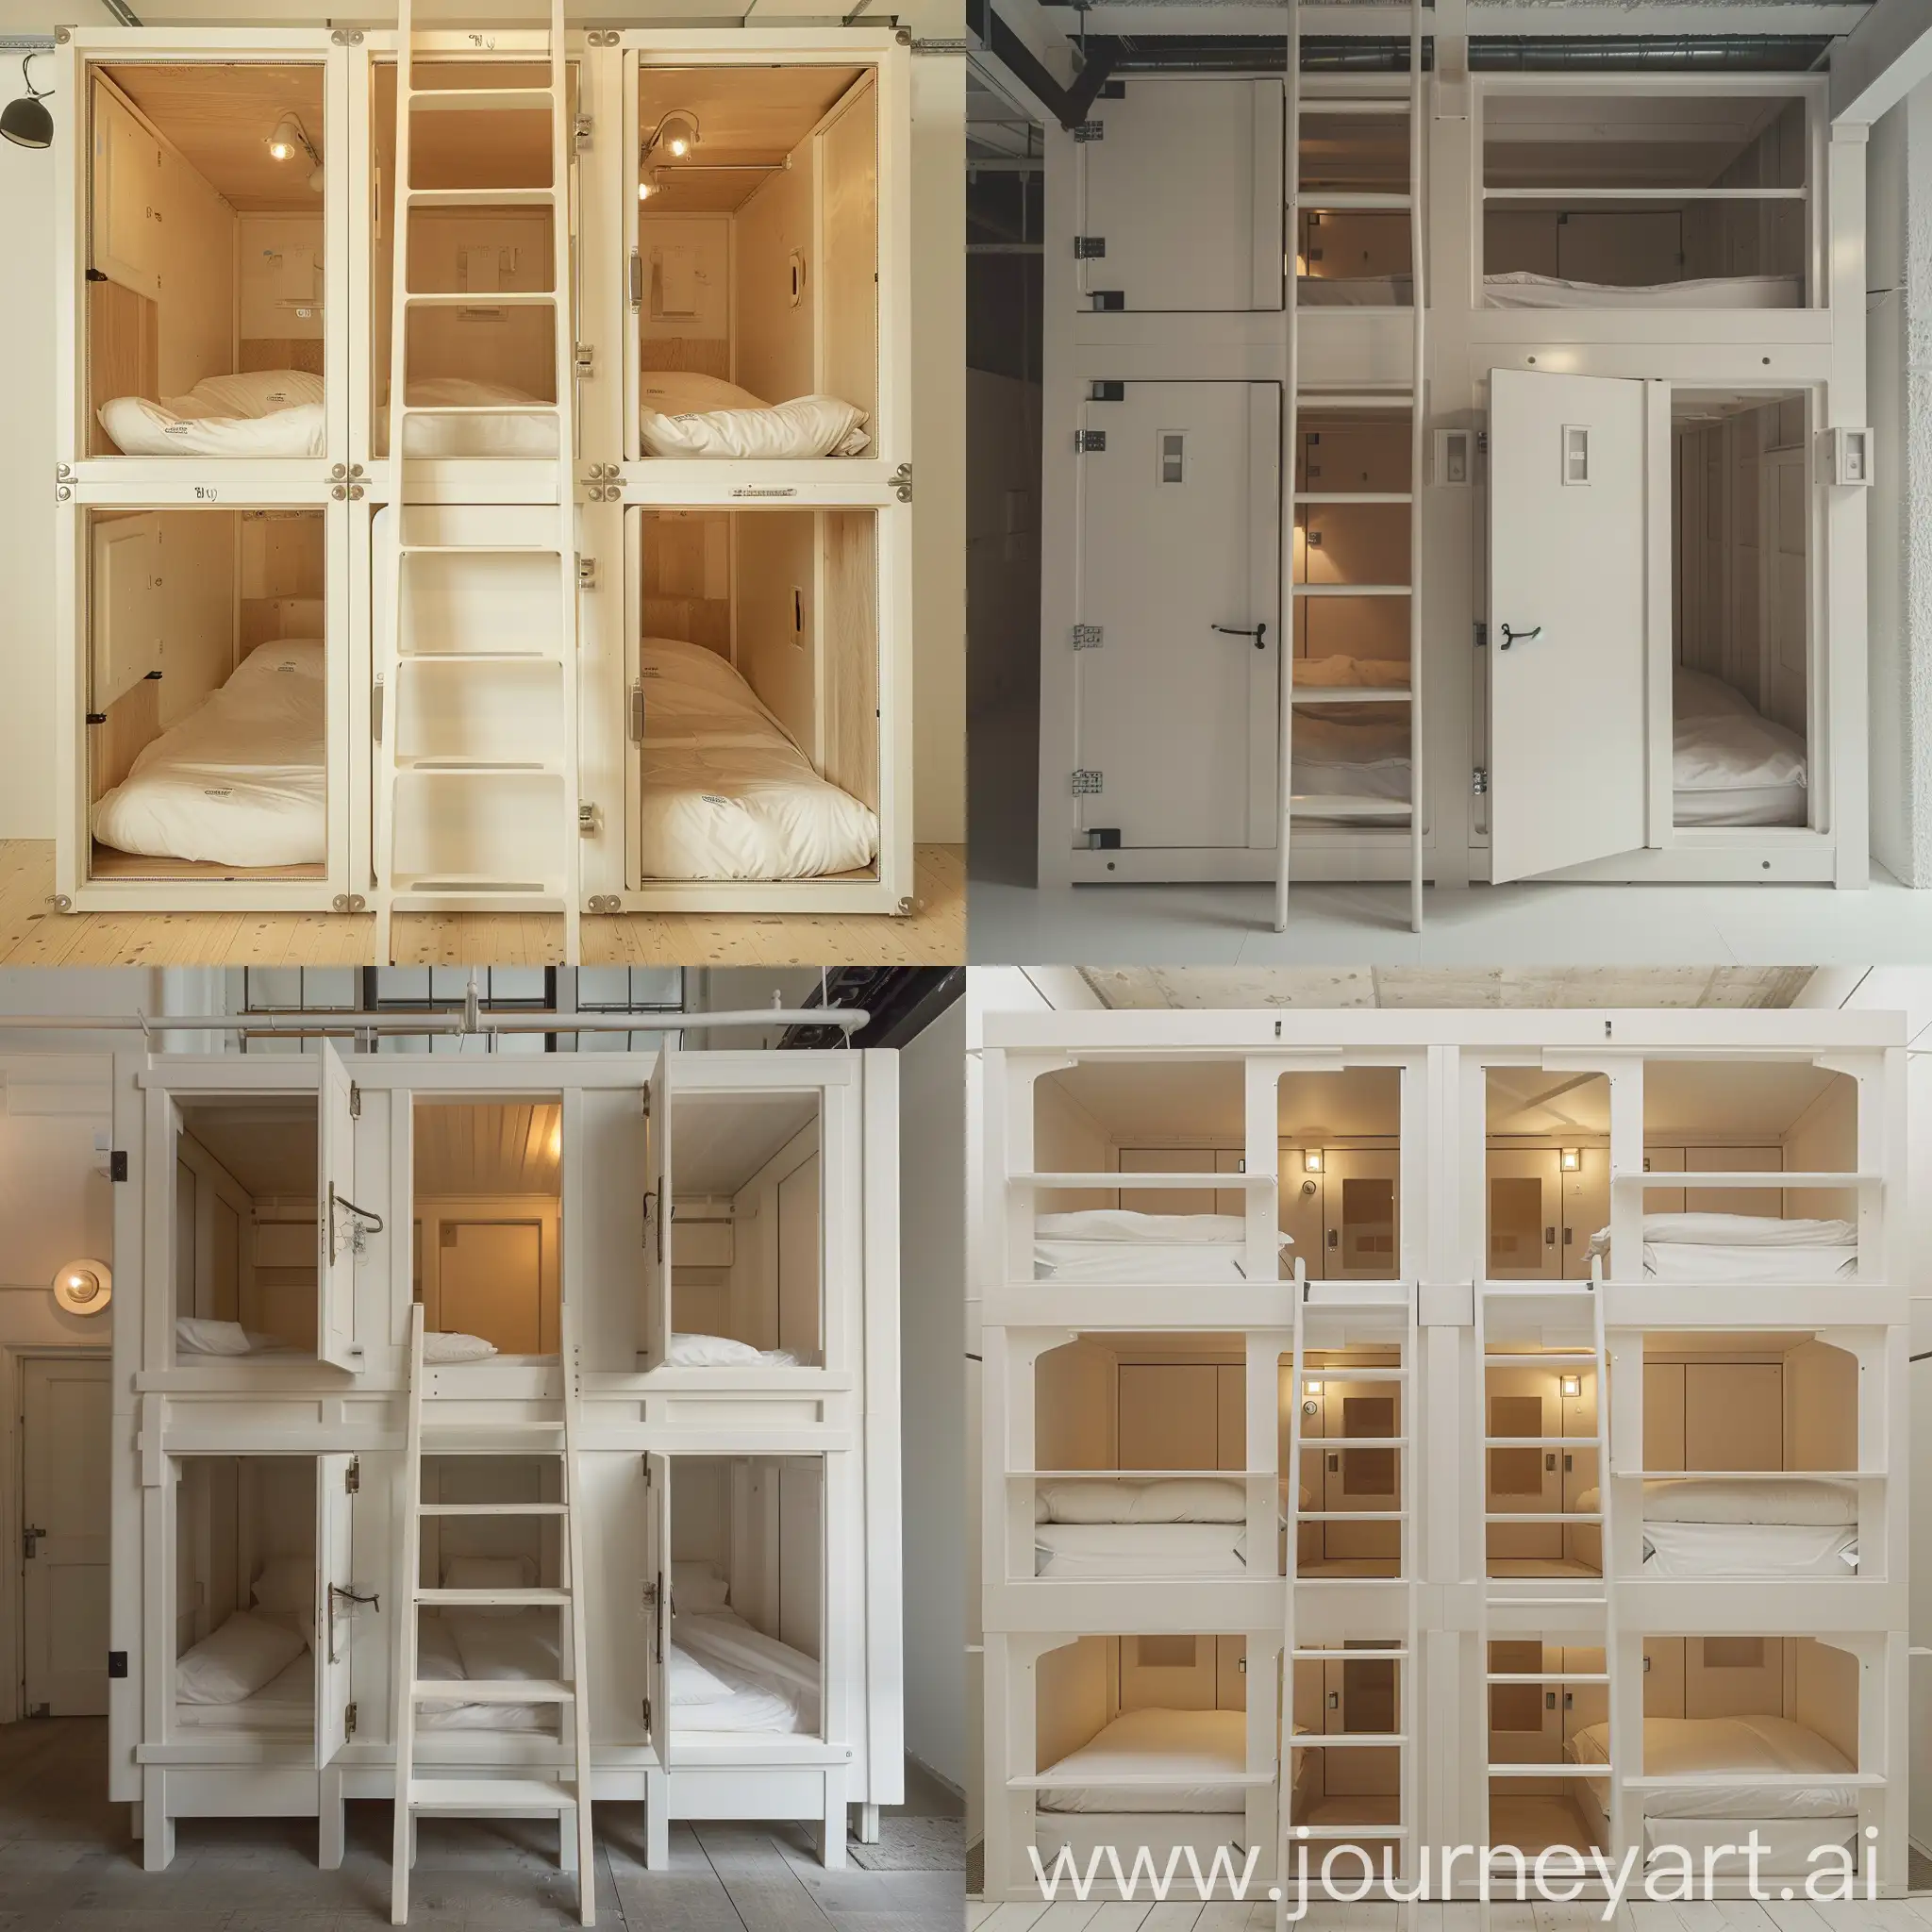 a simple closed unit design, like a Japanese capsule hotel, there is a door for each bed, there is a ladder from the floor that connects to the upper door , made of white wood.
